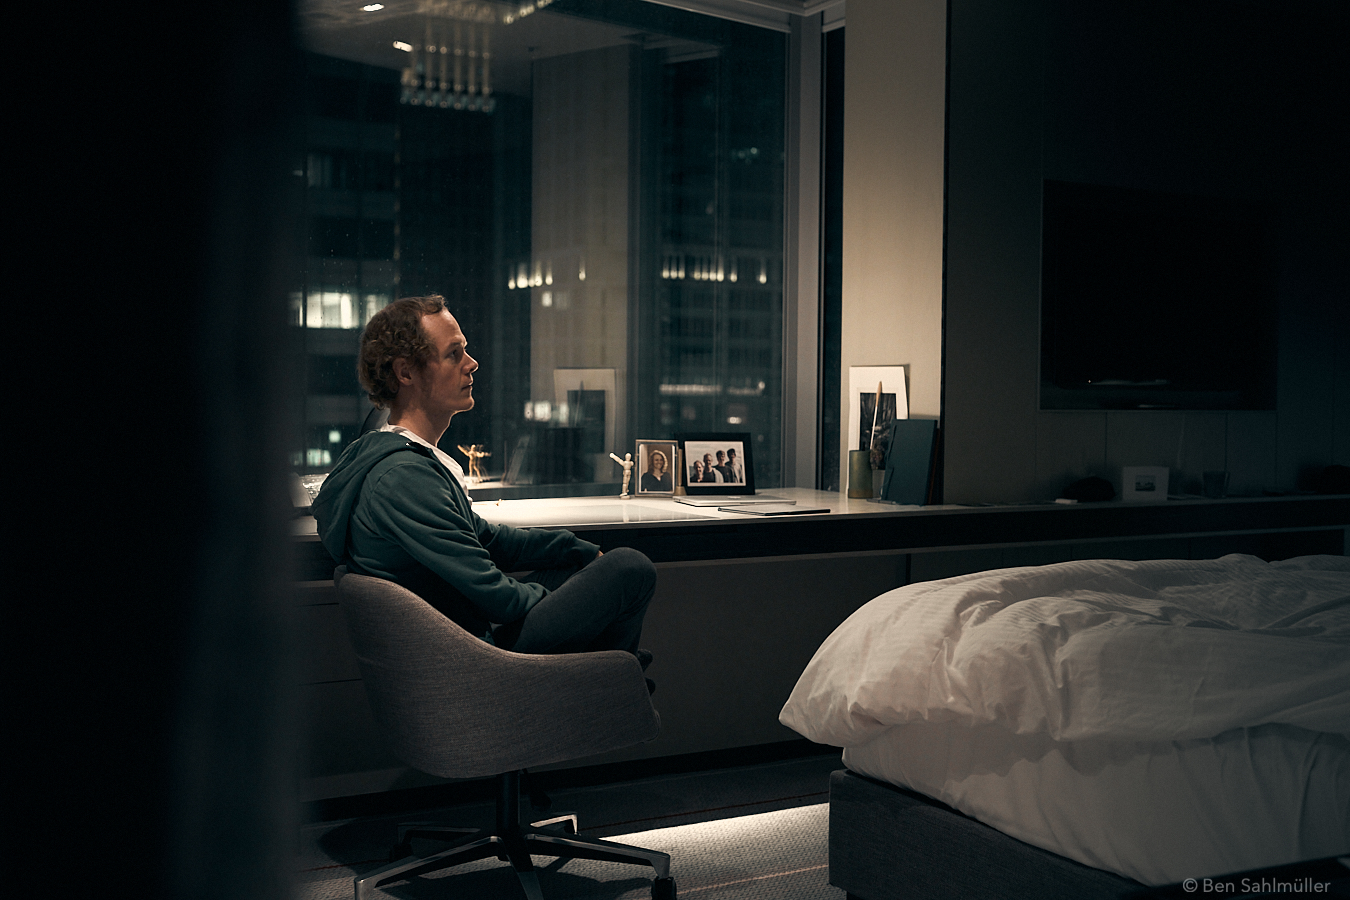 A young man sitting on a chair in a hotel room by night. He seems occupied with his thoughts, the scene reminds a bit of a film noir.